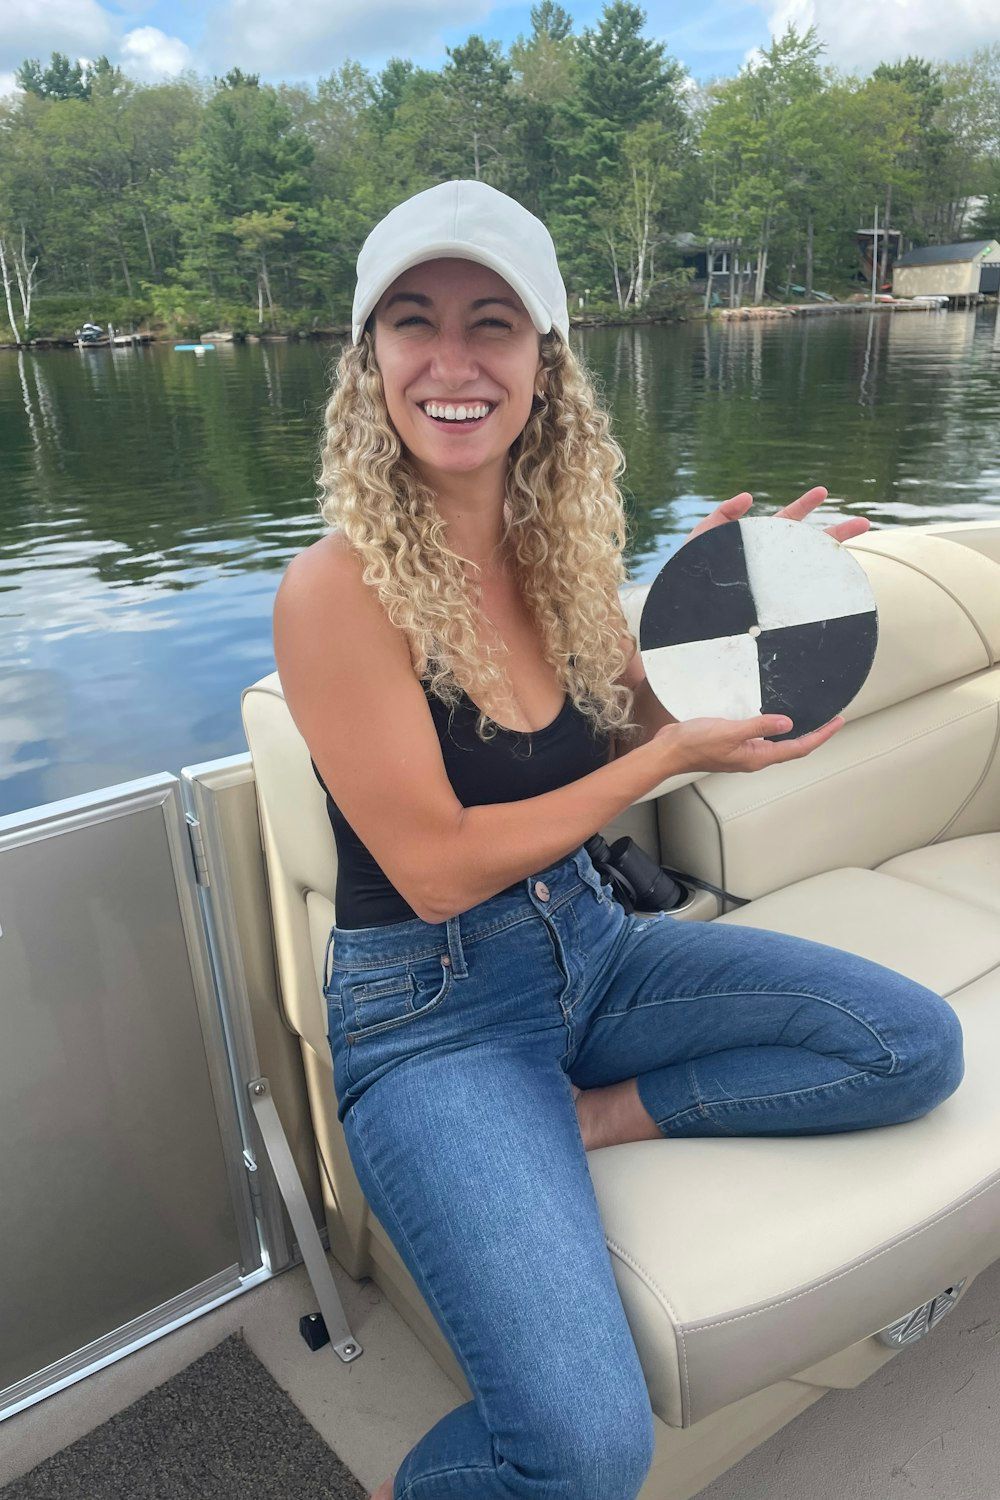 Liz Favot sits on a boat holding a secchi disk